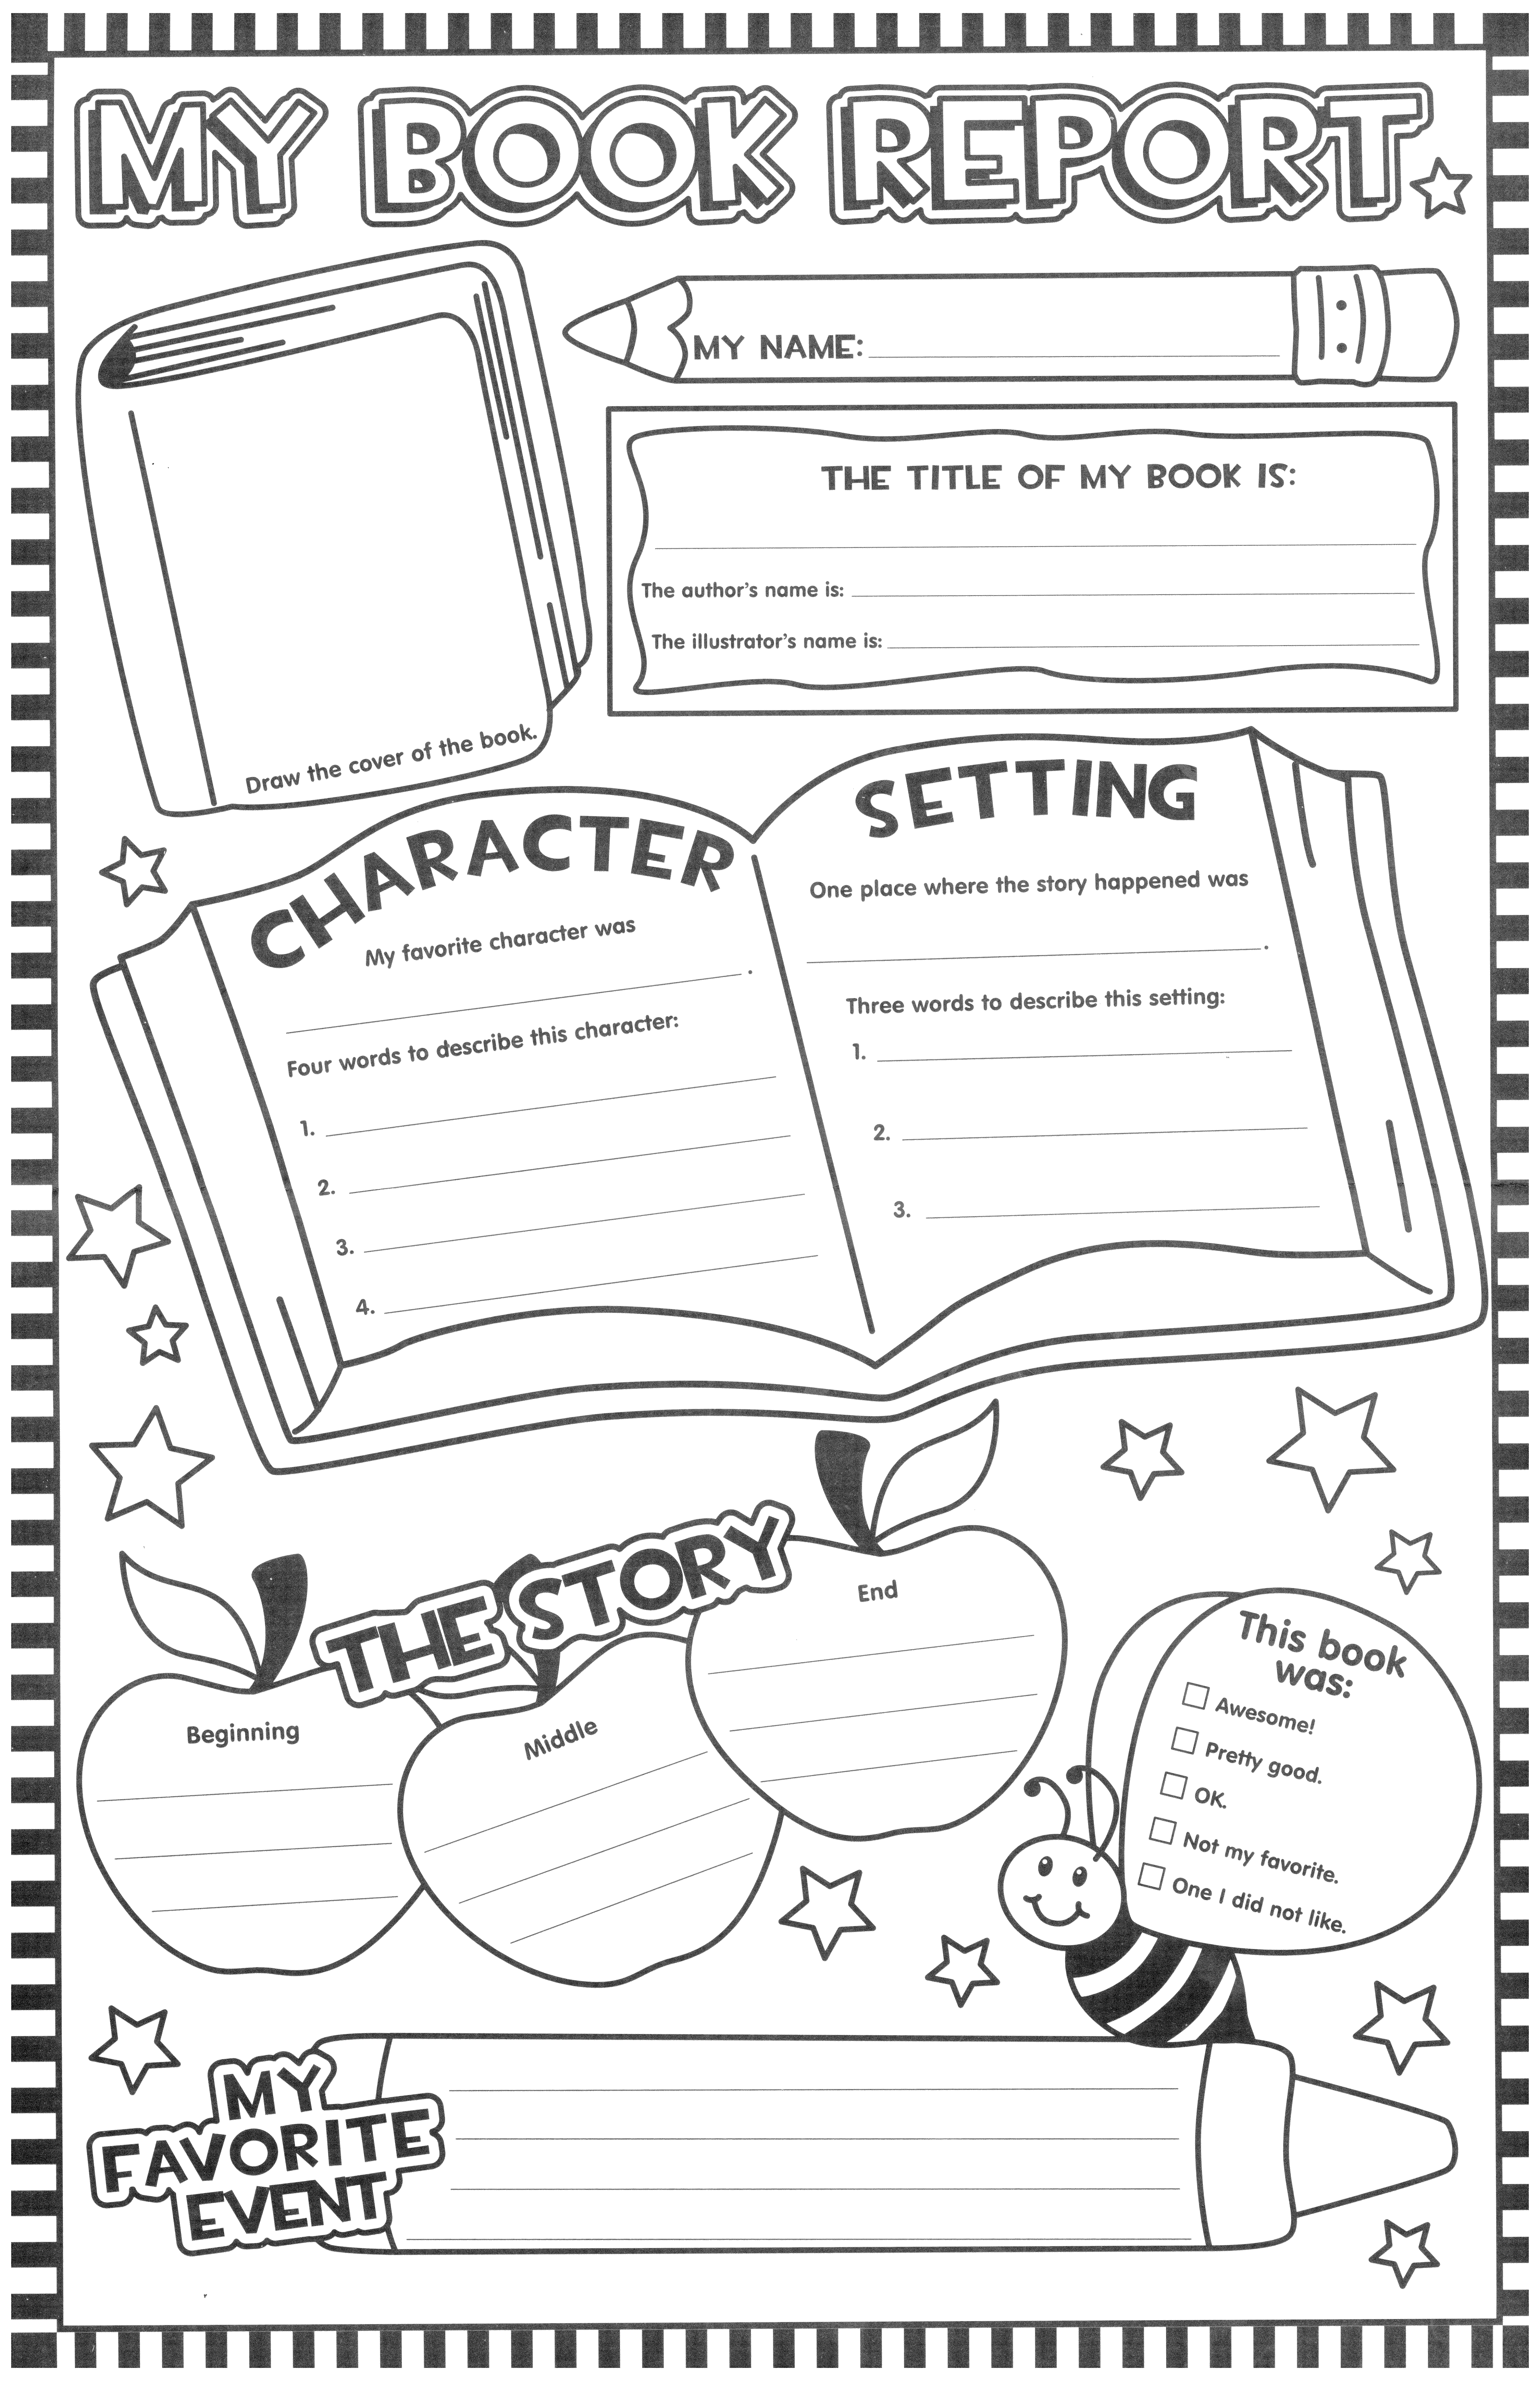 Easy printable book report forms